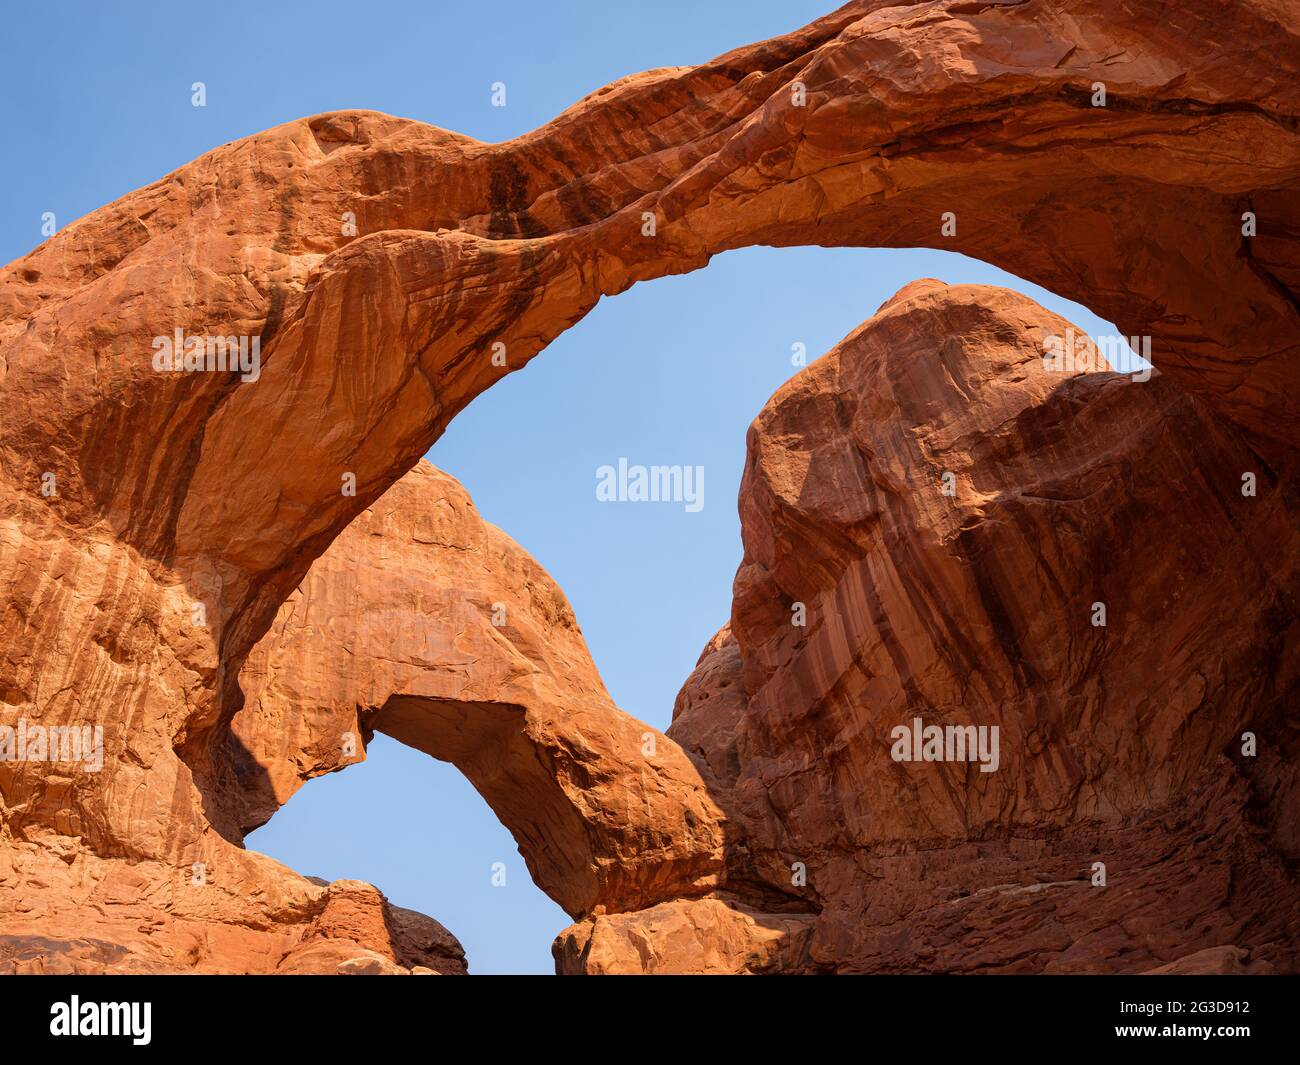 ARCHES NATIONAL PARK, UTAH - CIRCA AUGUST 2020: The Double Arch in Arches National Park. Double Arch is a close-set pair of natural arches in Arches N Stock Photo